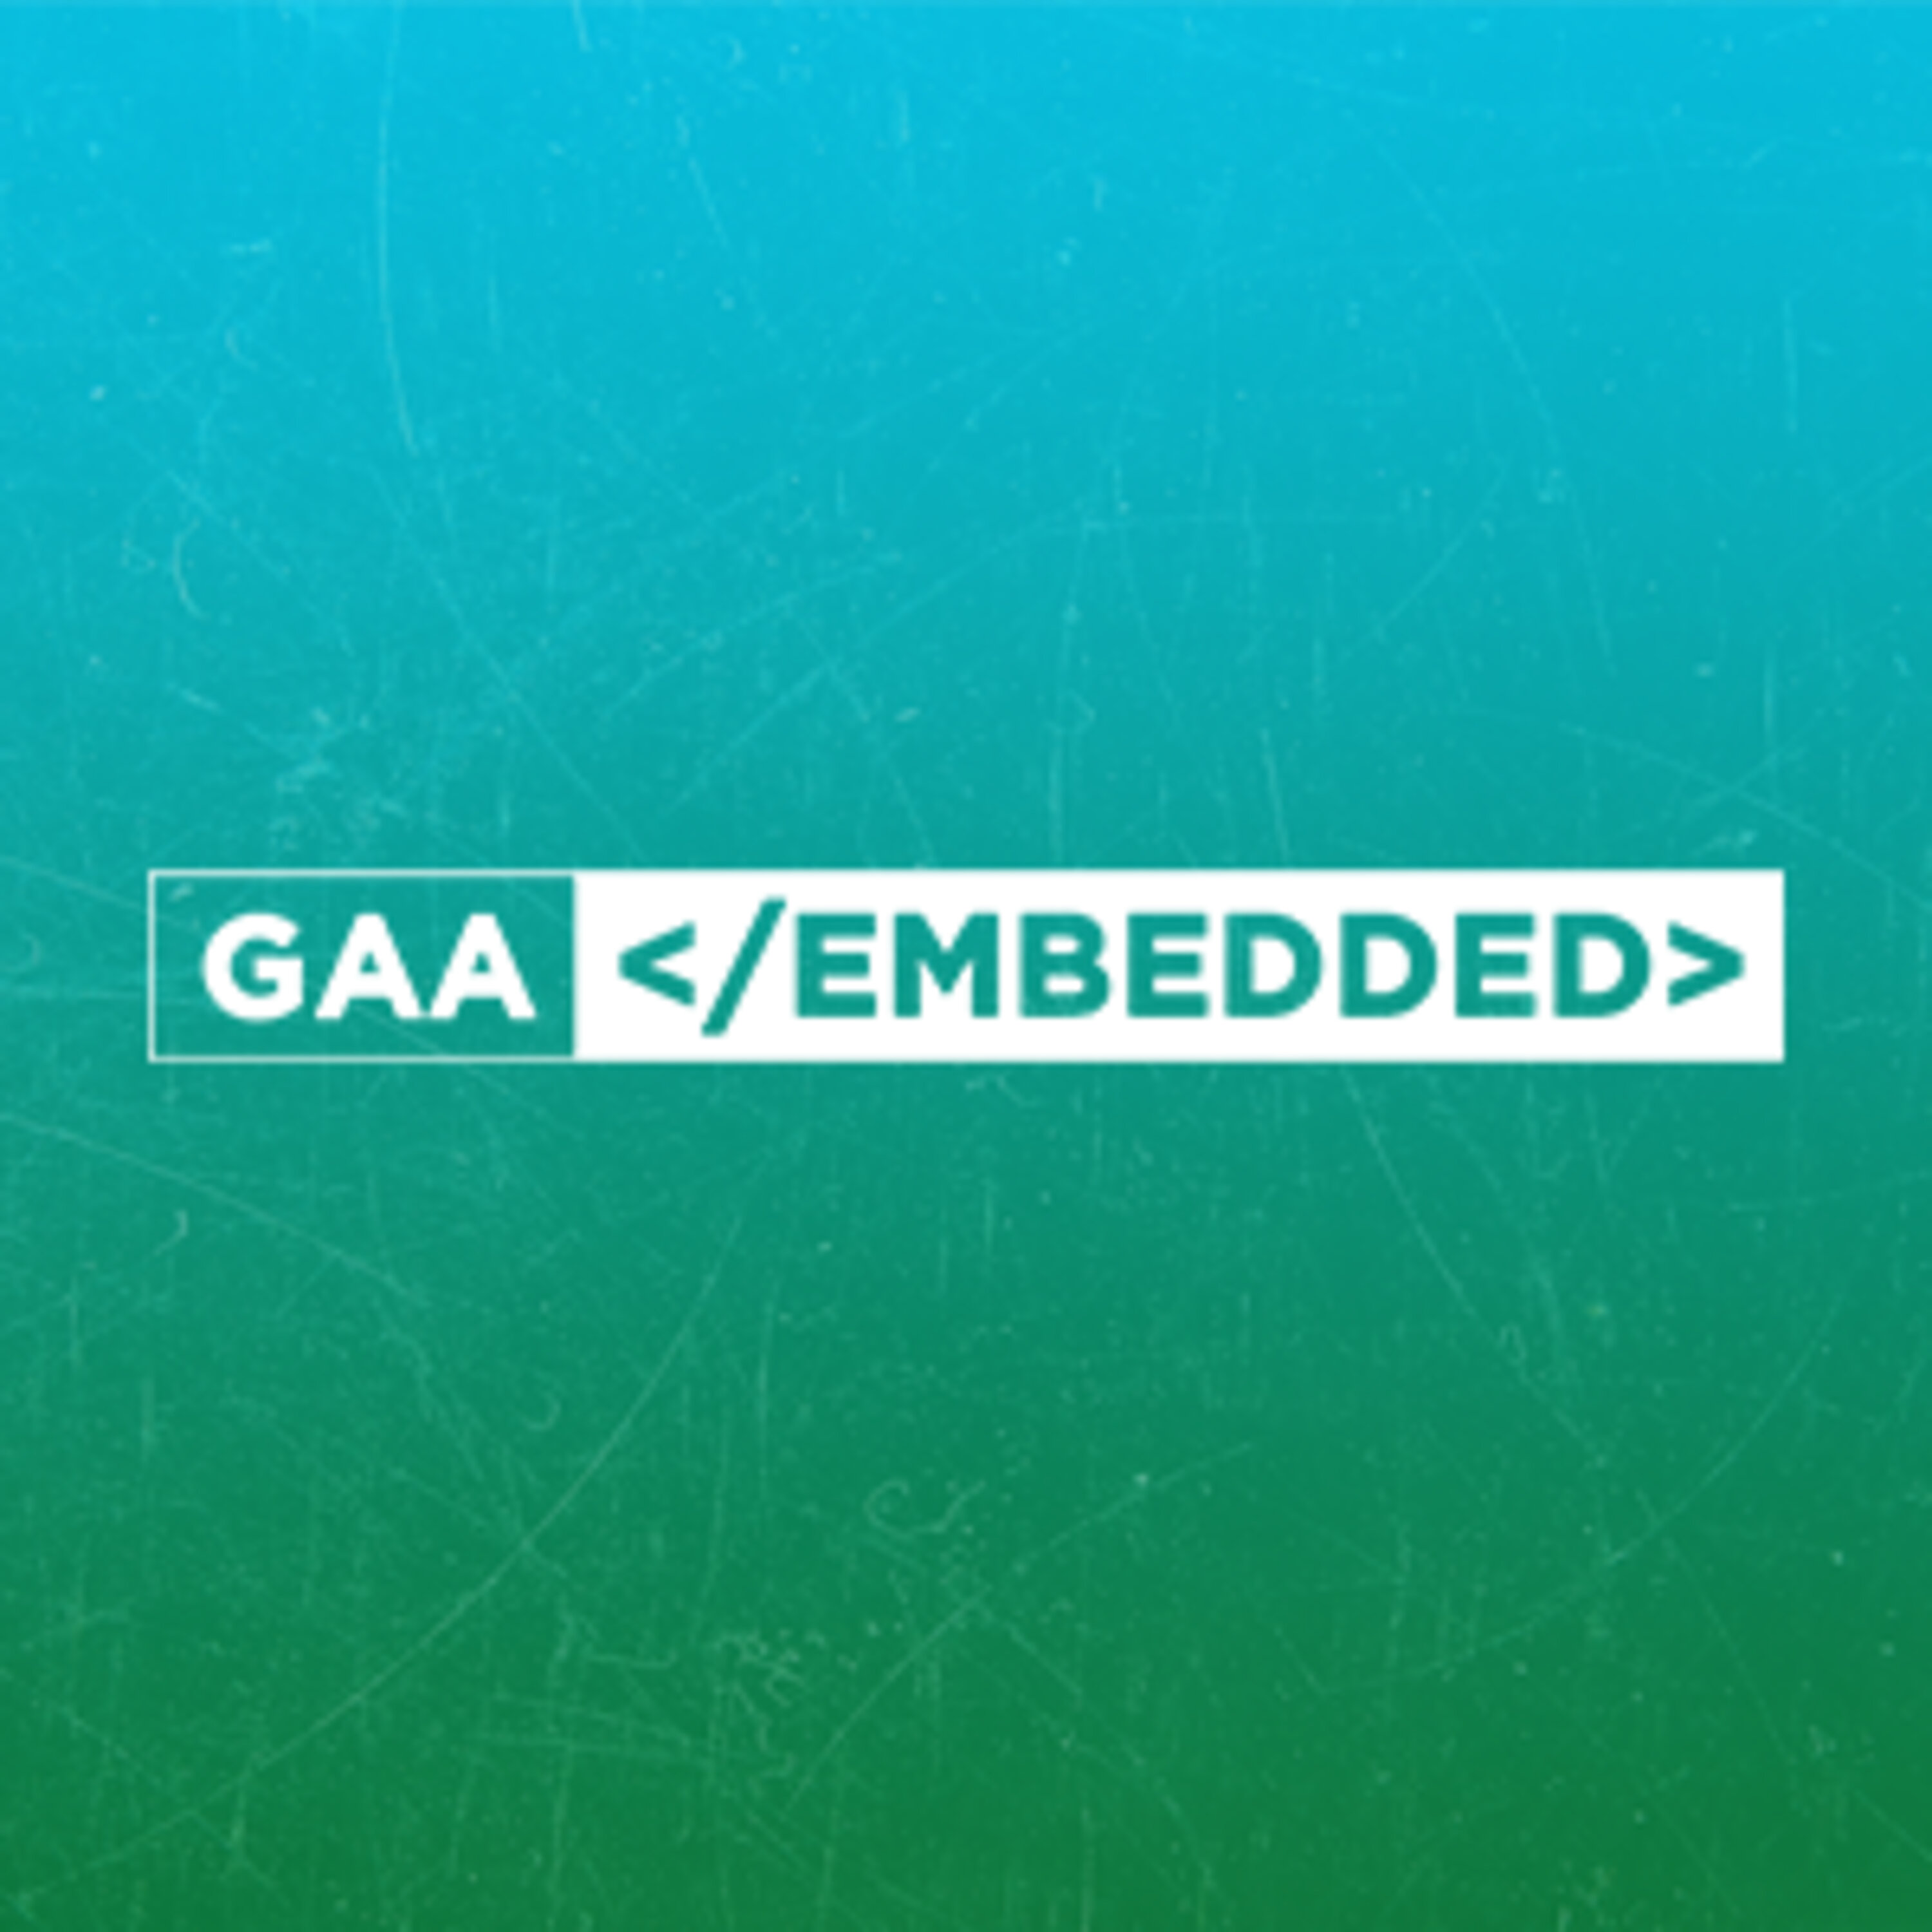 GAA Embedded -  Kerry And Mayo Markers, Galway's Disastrous Weekend, With Darran O'Sullivan & Shane McGrath